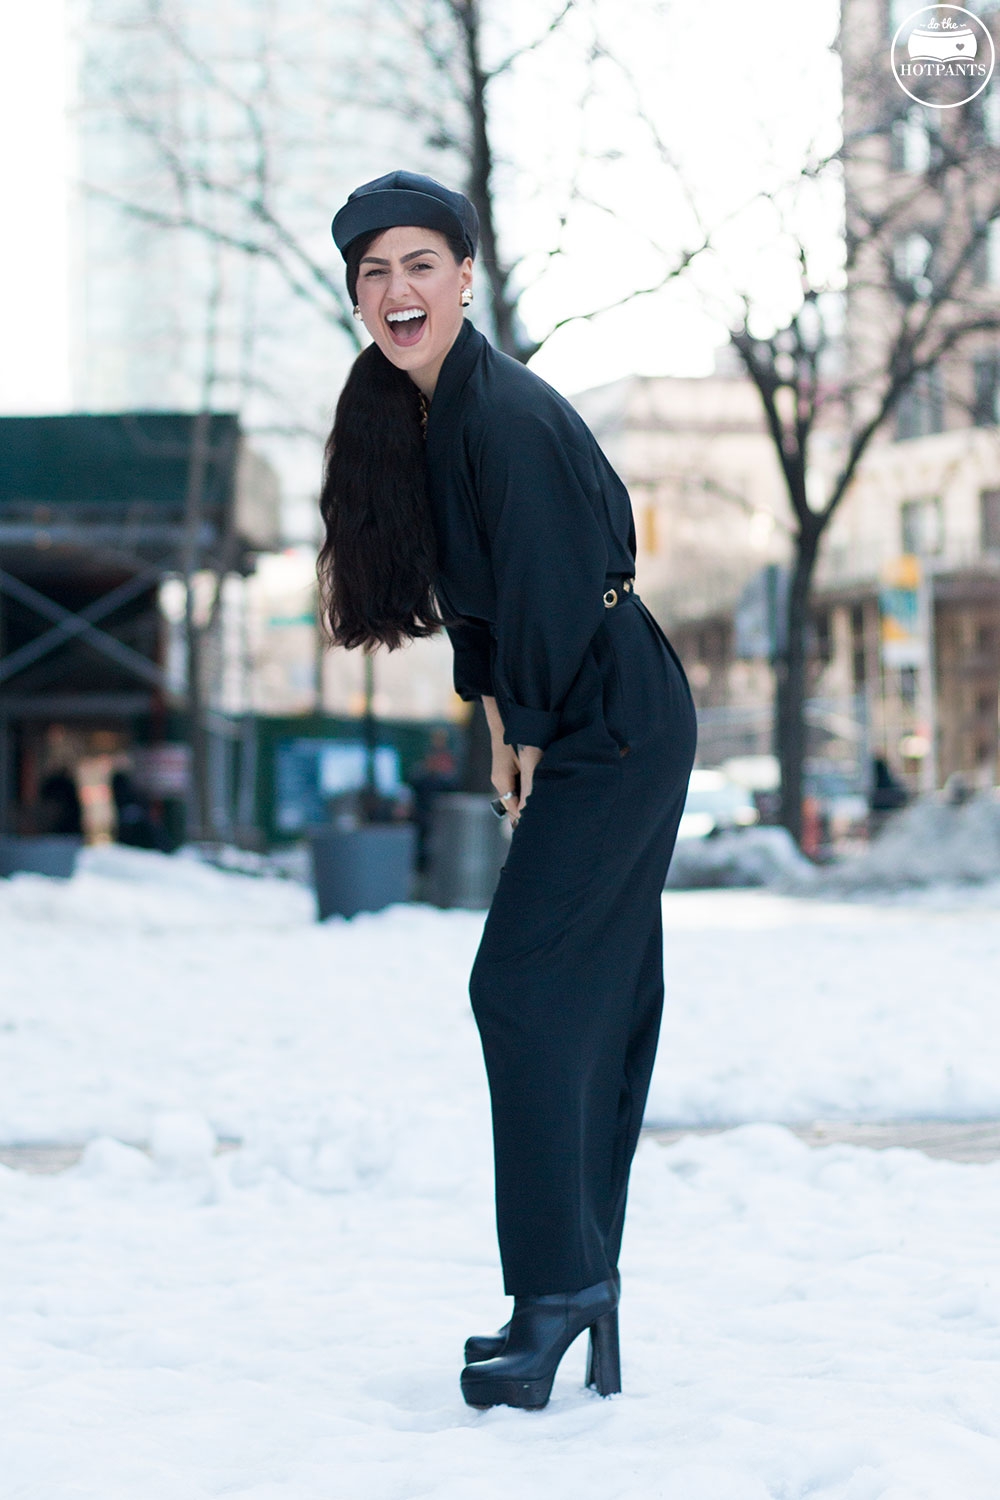 Do The Hotpants Dana Suchow Black Goth Jumpsuit Side Ponytail Leather Hat Winter Fashion Woman in Snow IMG_6318